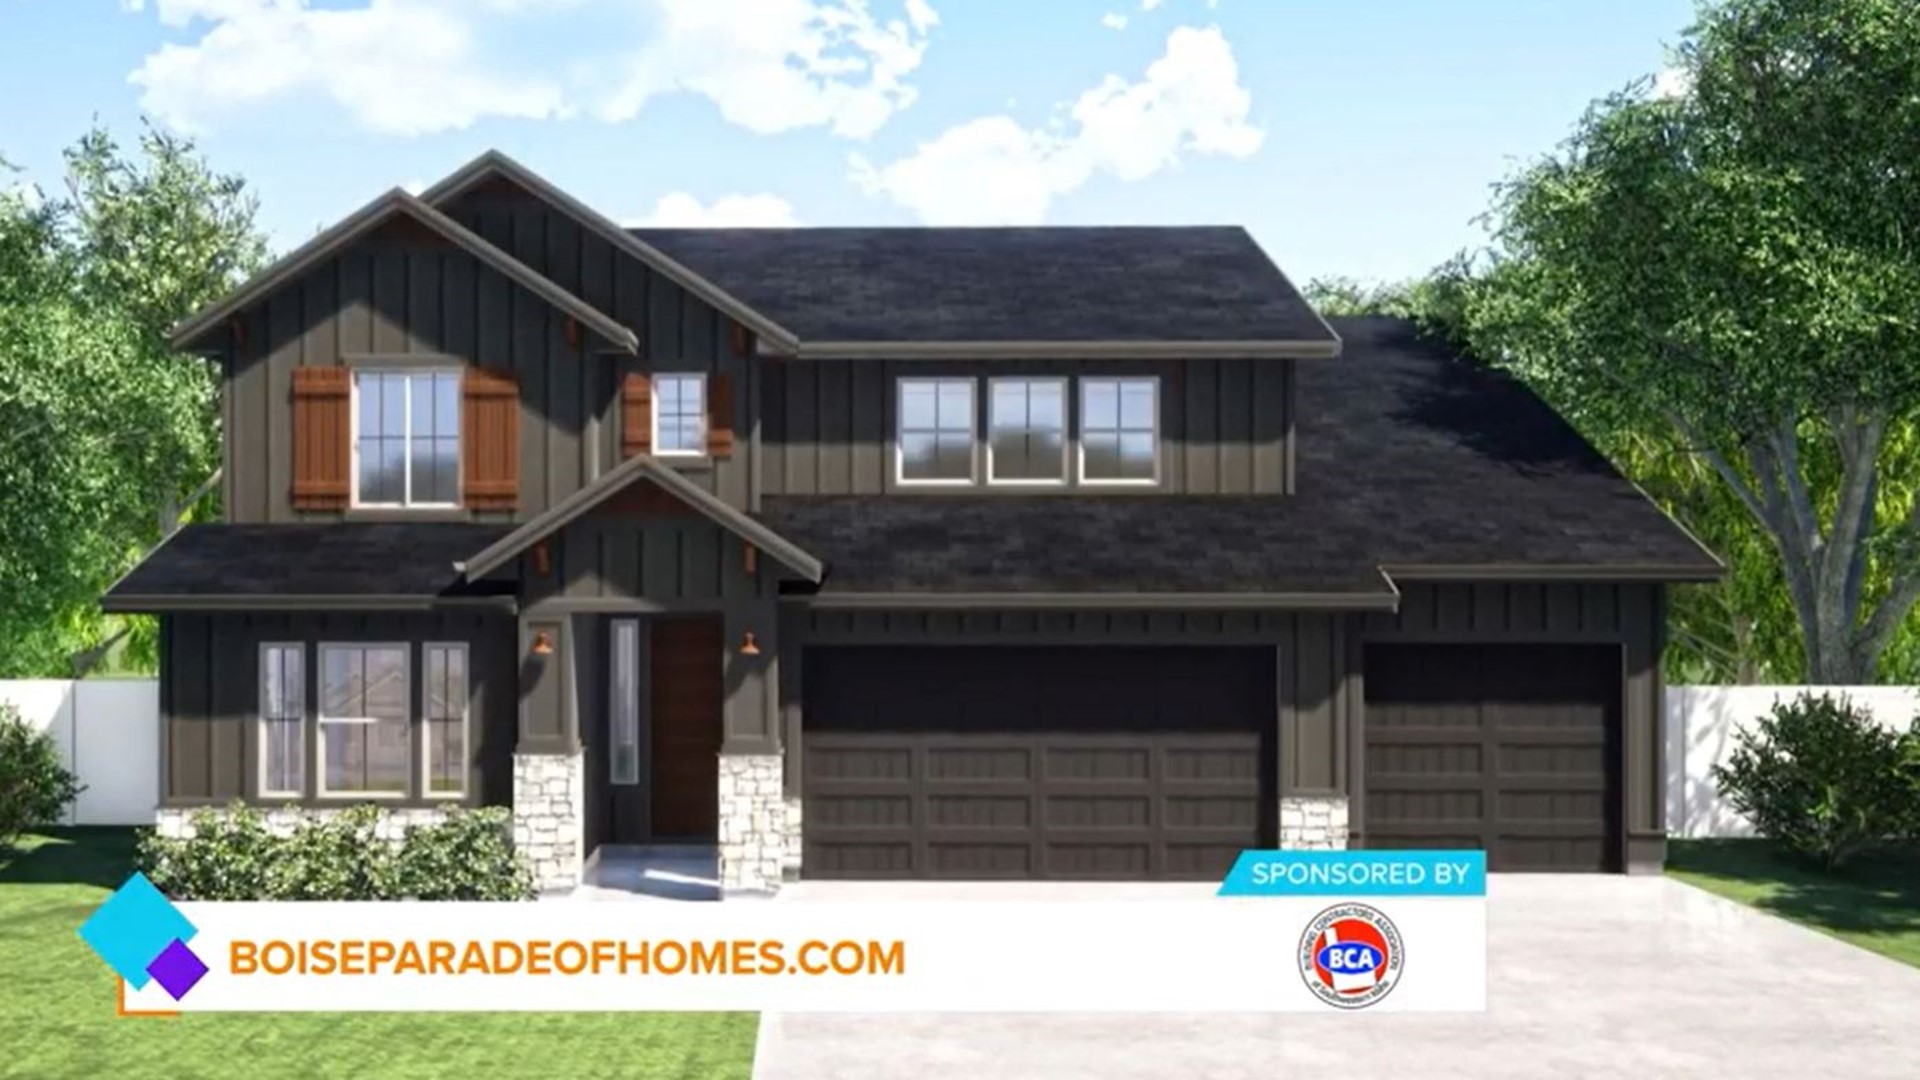 Sponsored by The Building Contractors Association of Southwestern Idaho. Bill Rauer from the BCA of Southwestern Idaho let us know all about the fall Parade of Homes